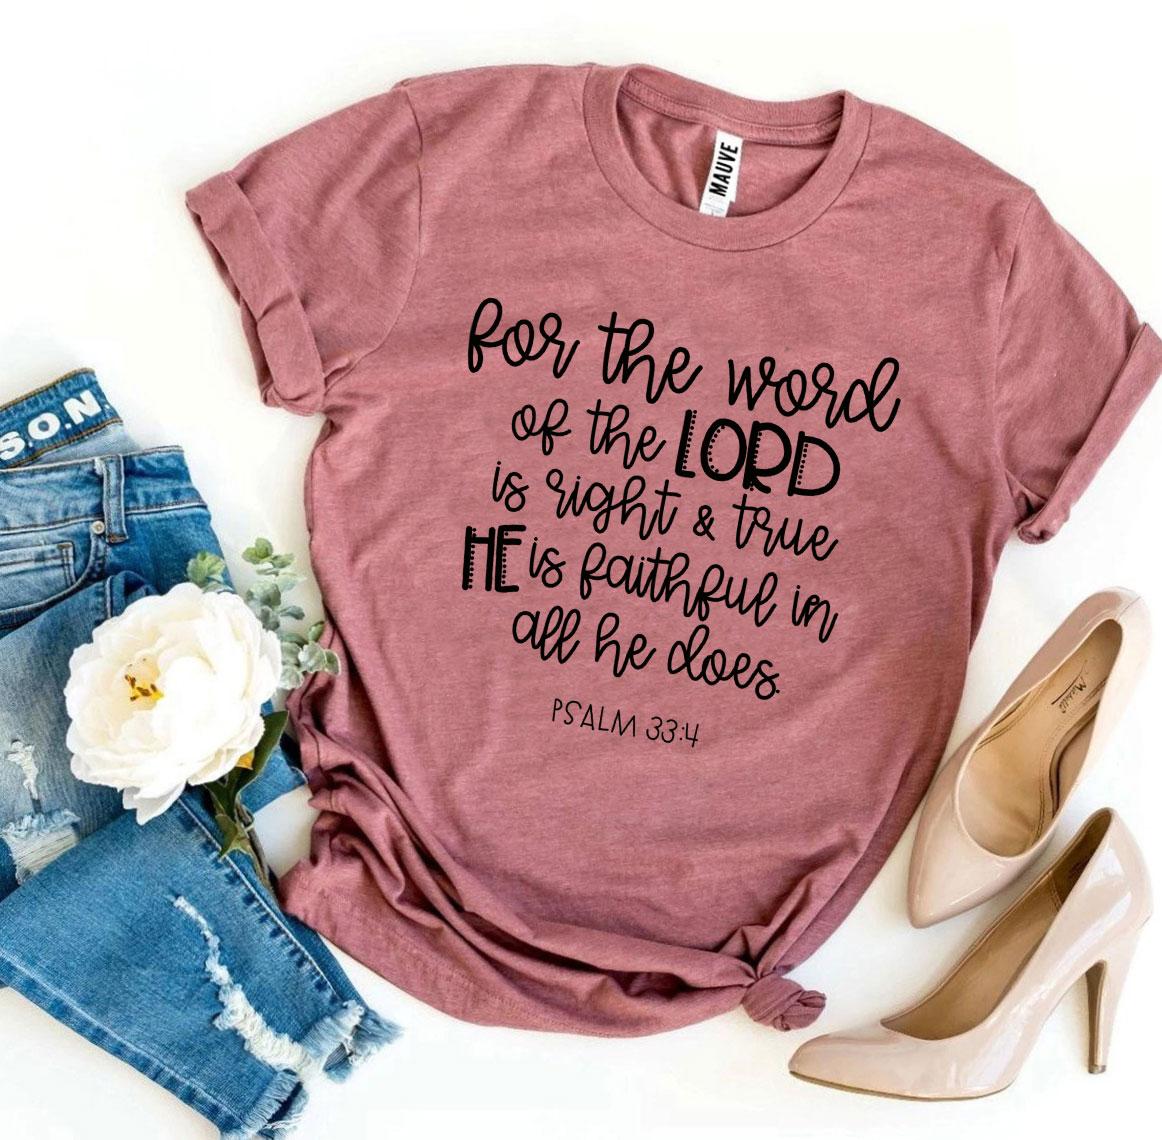 The Lord Is Right T-shirt